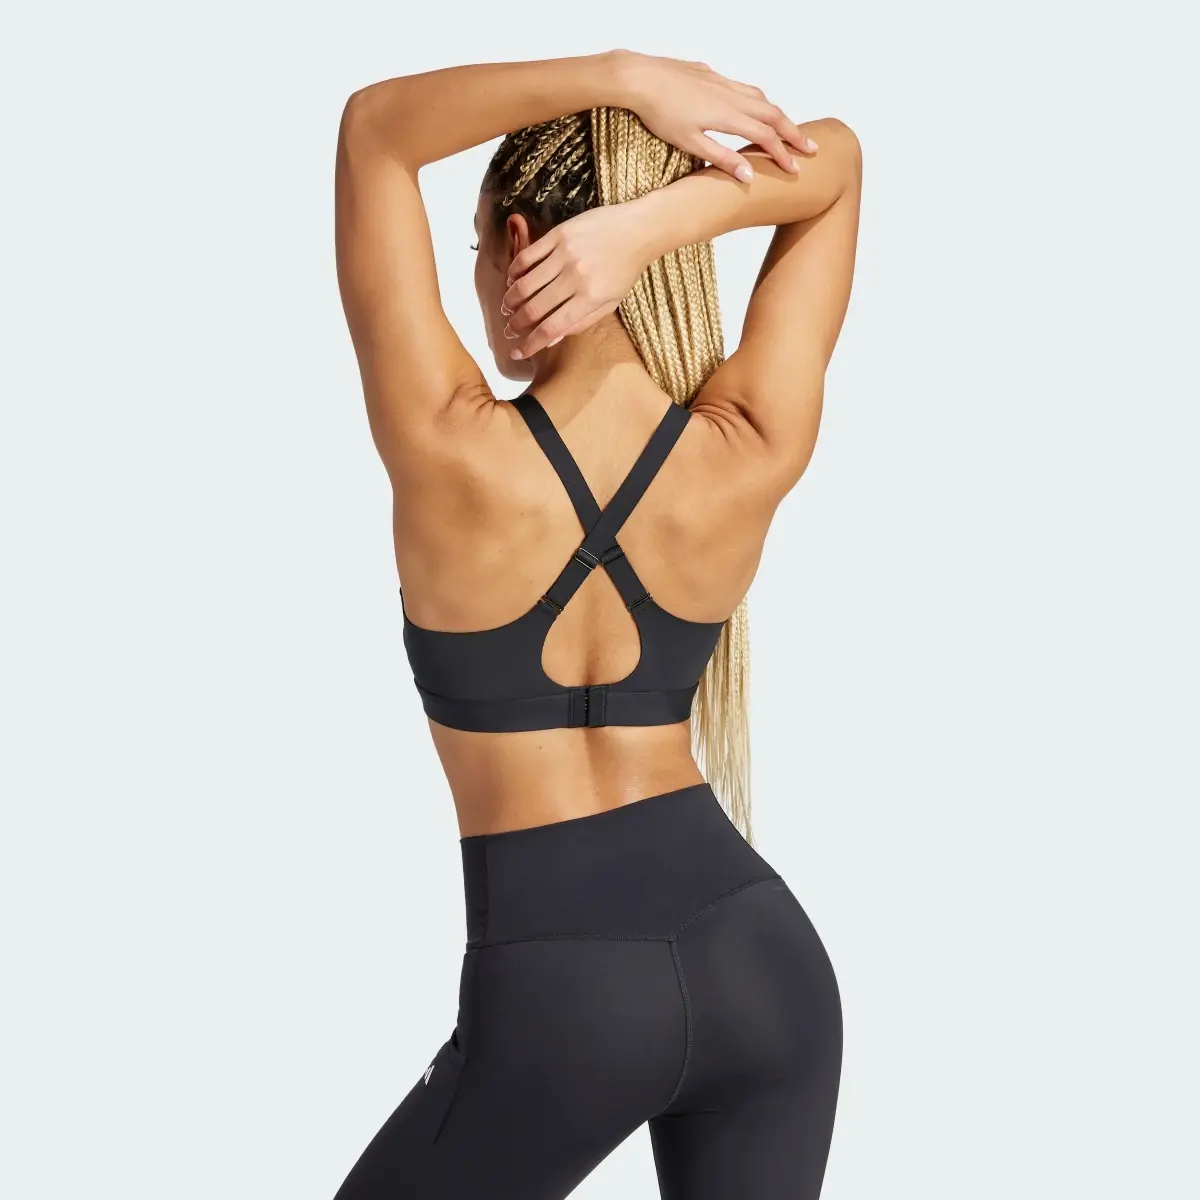 Adidas TLRD Impact Luxe Training High-Support Bra. 3